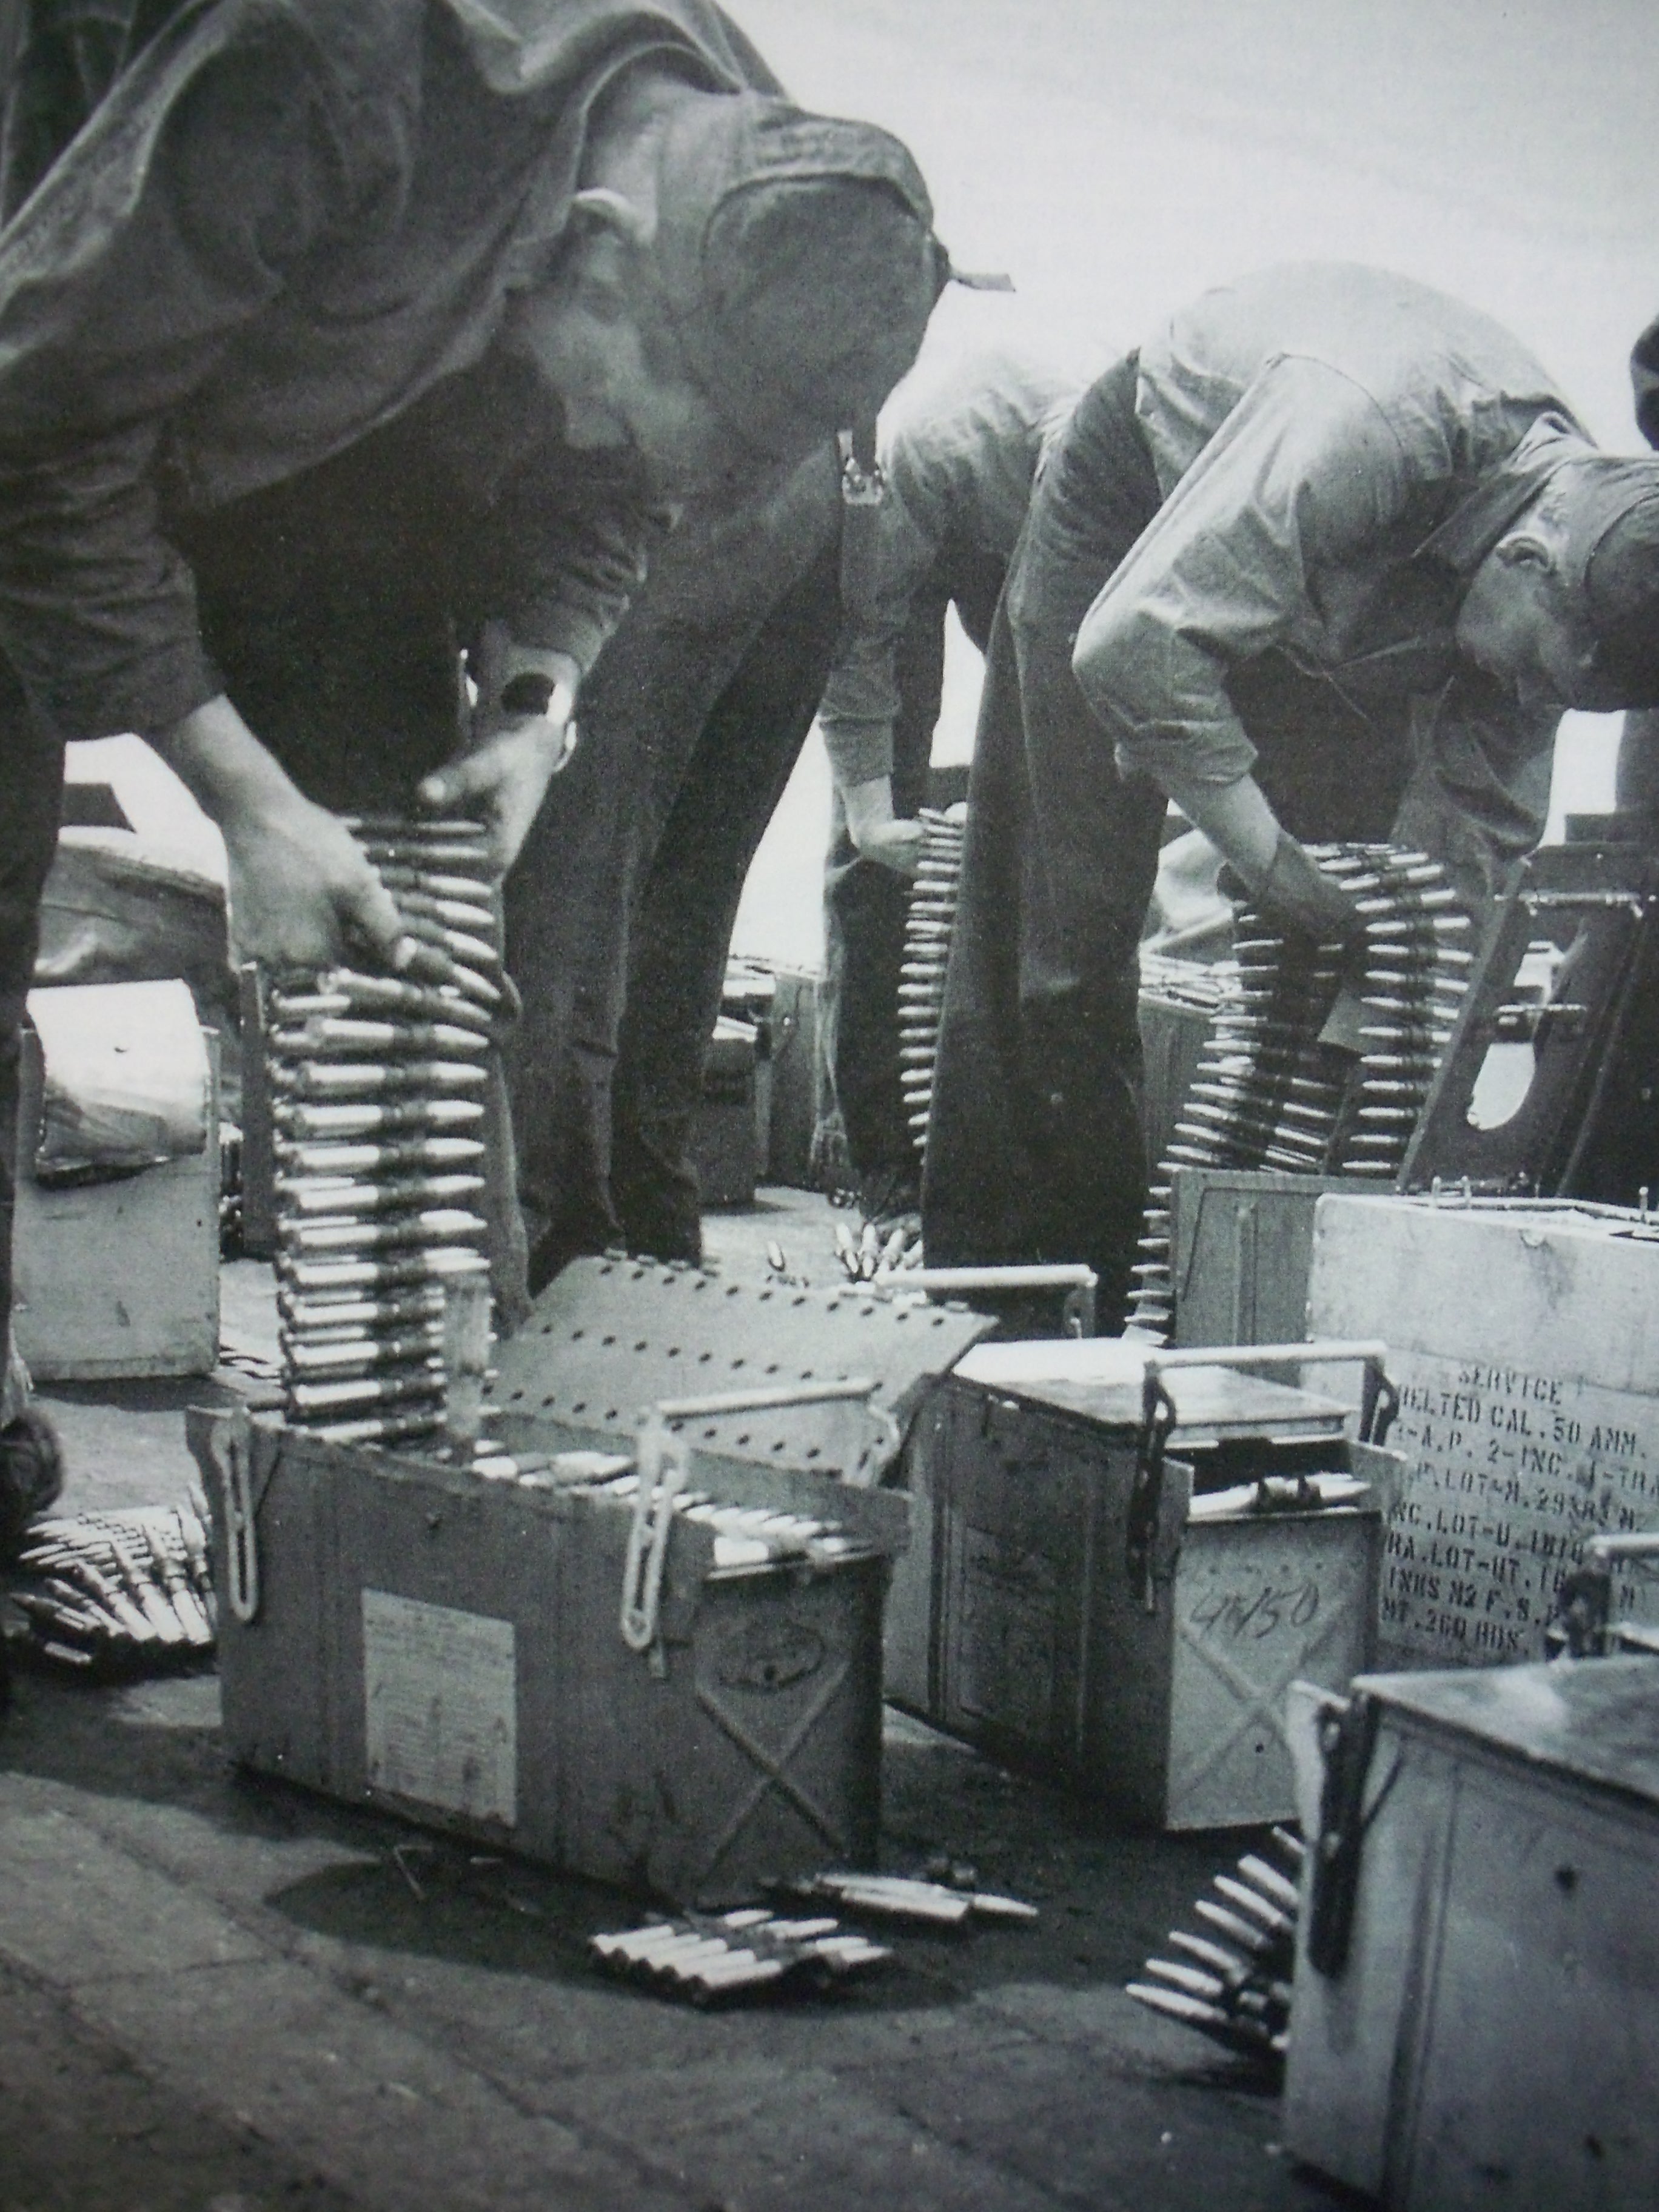 ESSEX CV-9 088 MP Loading aircraft magazines with 50 caliber ammo for planes WWII.JPG